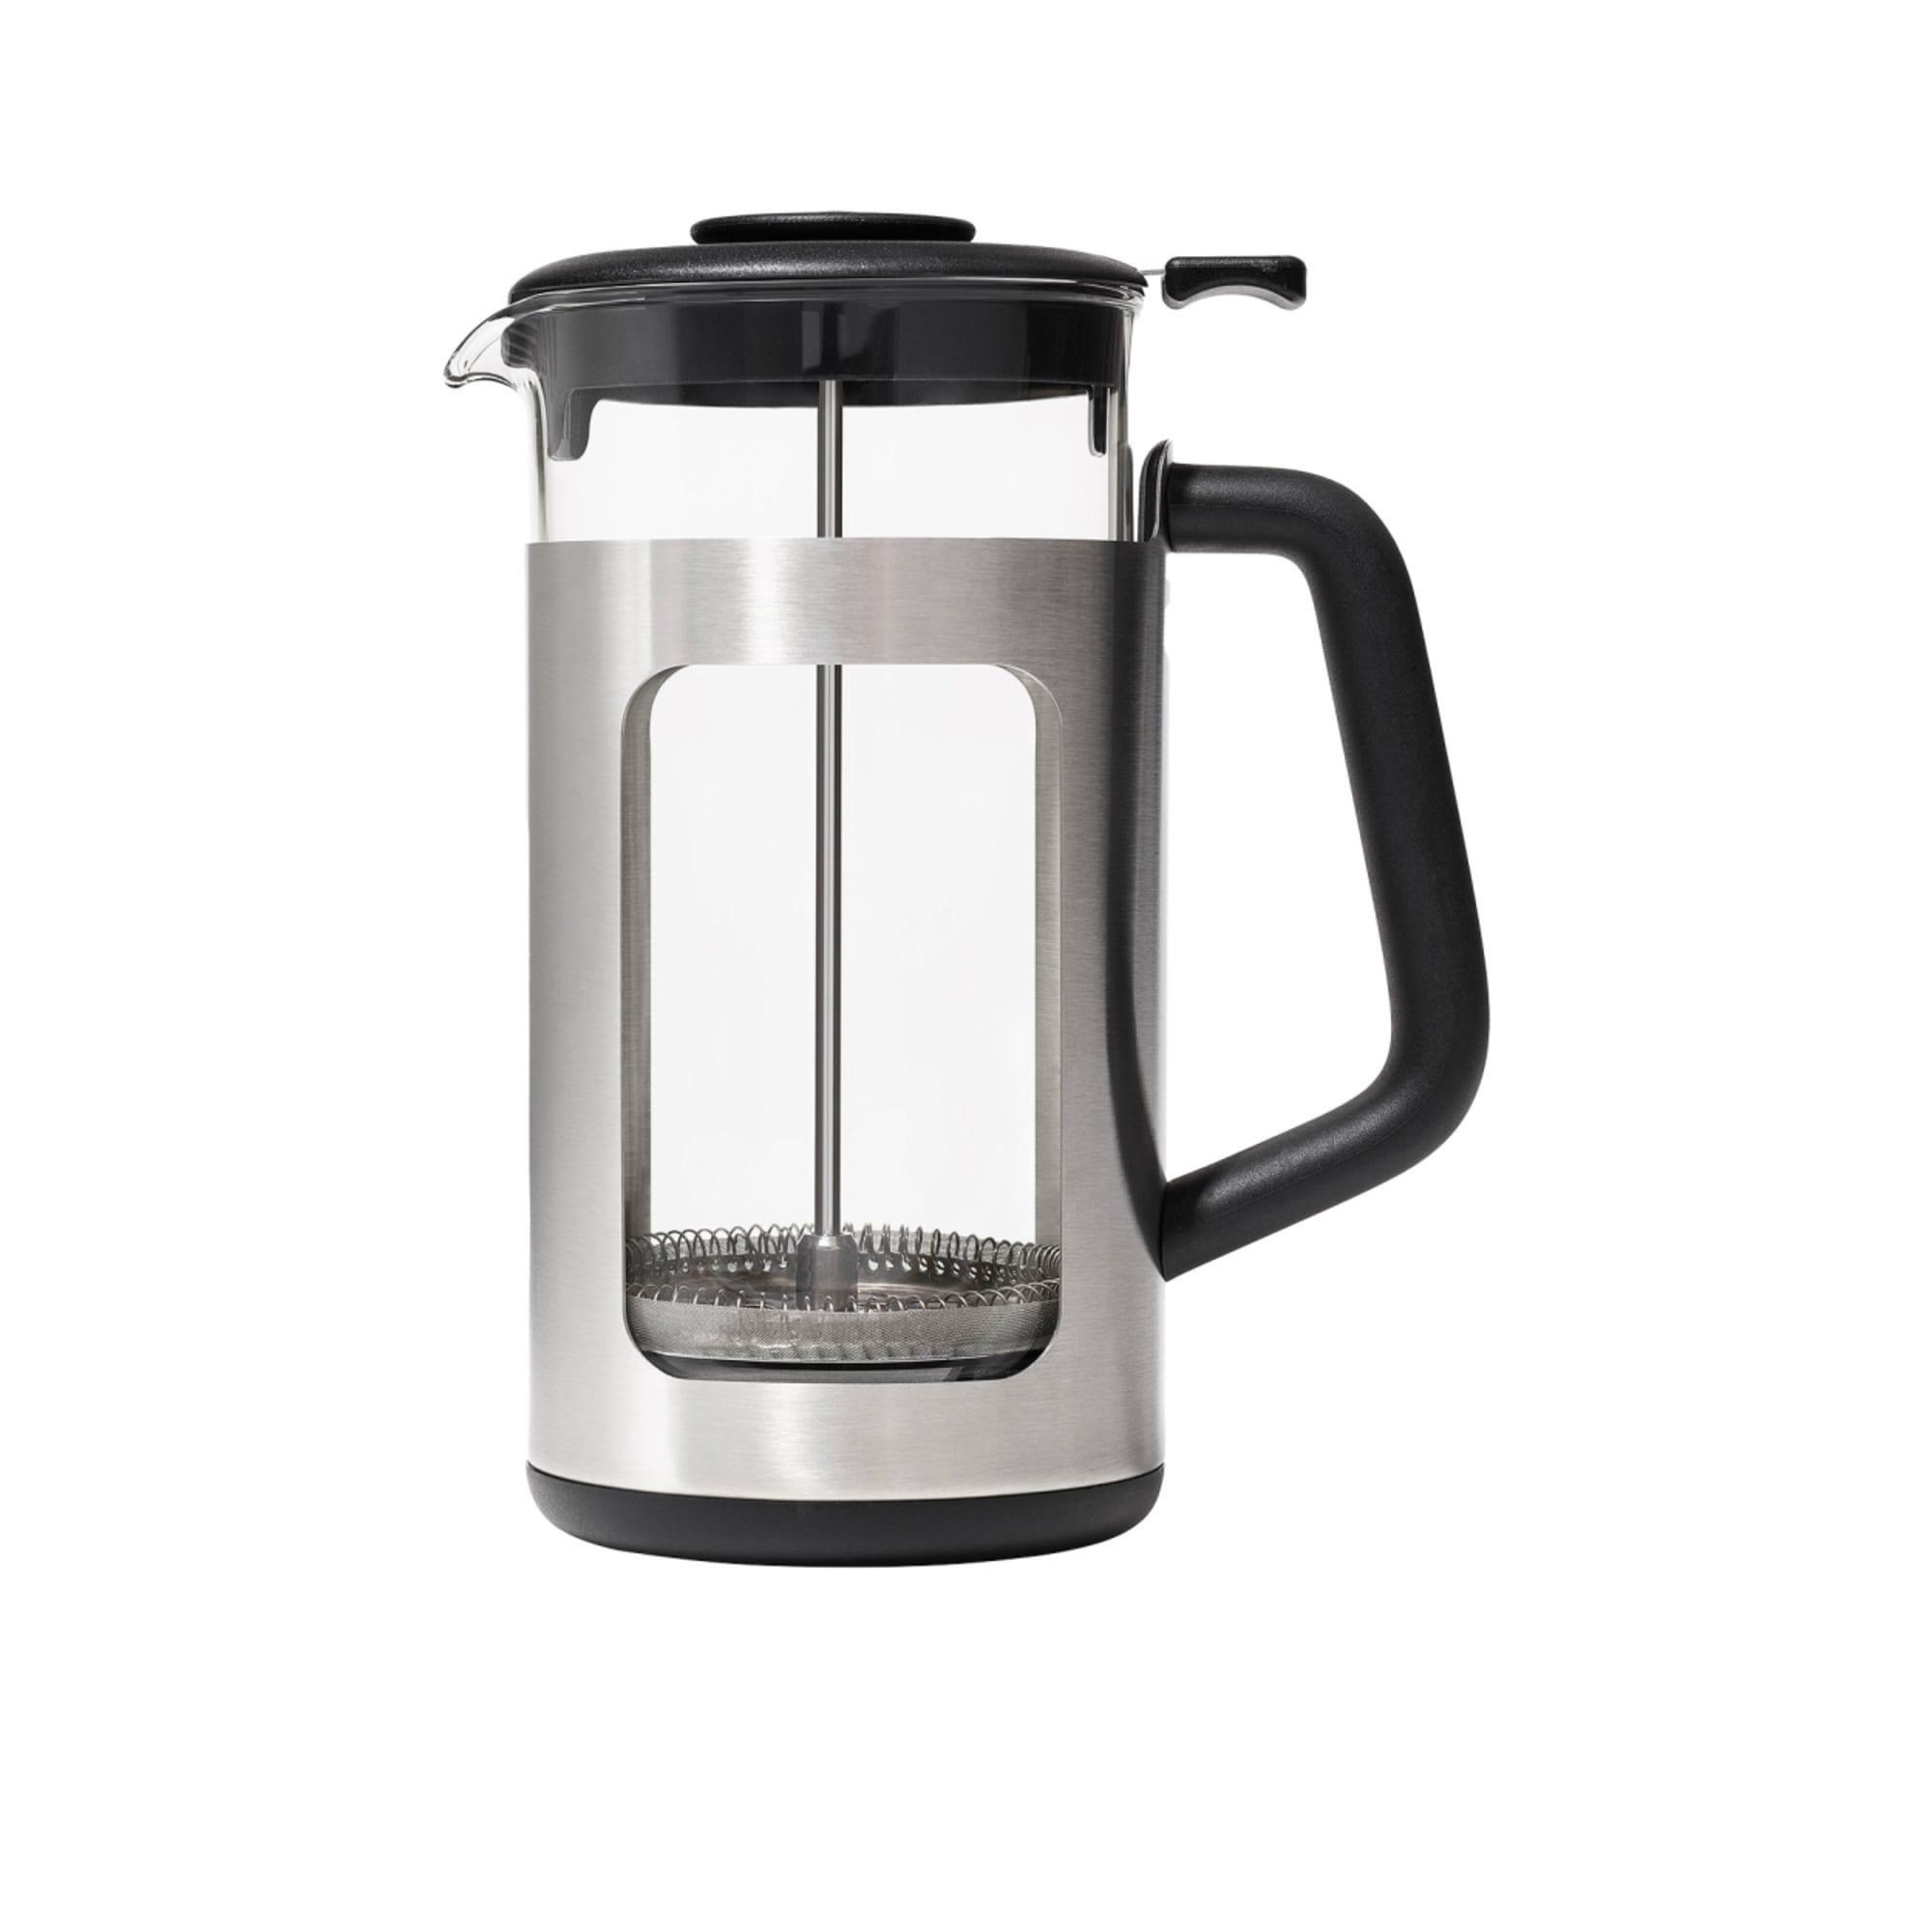 OXO Good Grips French Press with Grounds Lifter 8 Cup Image 1